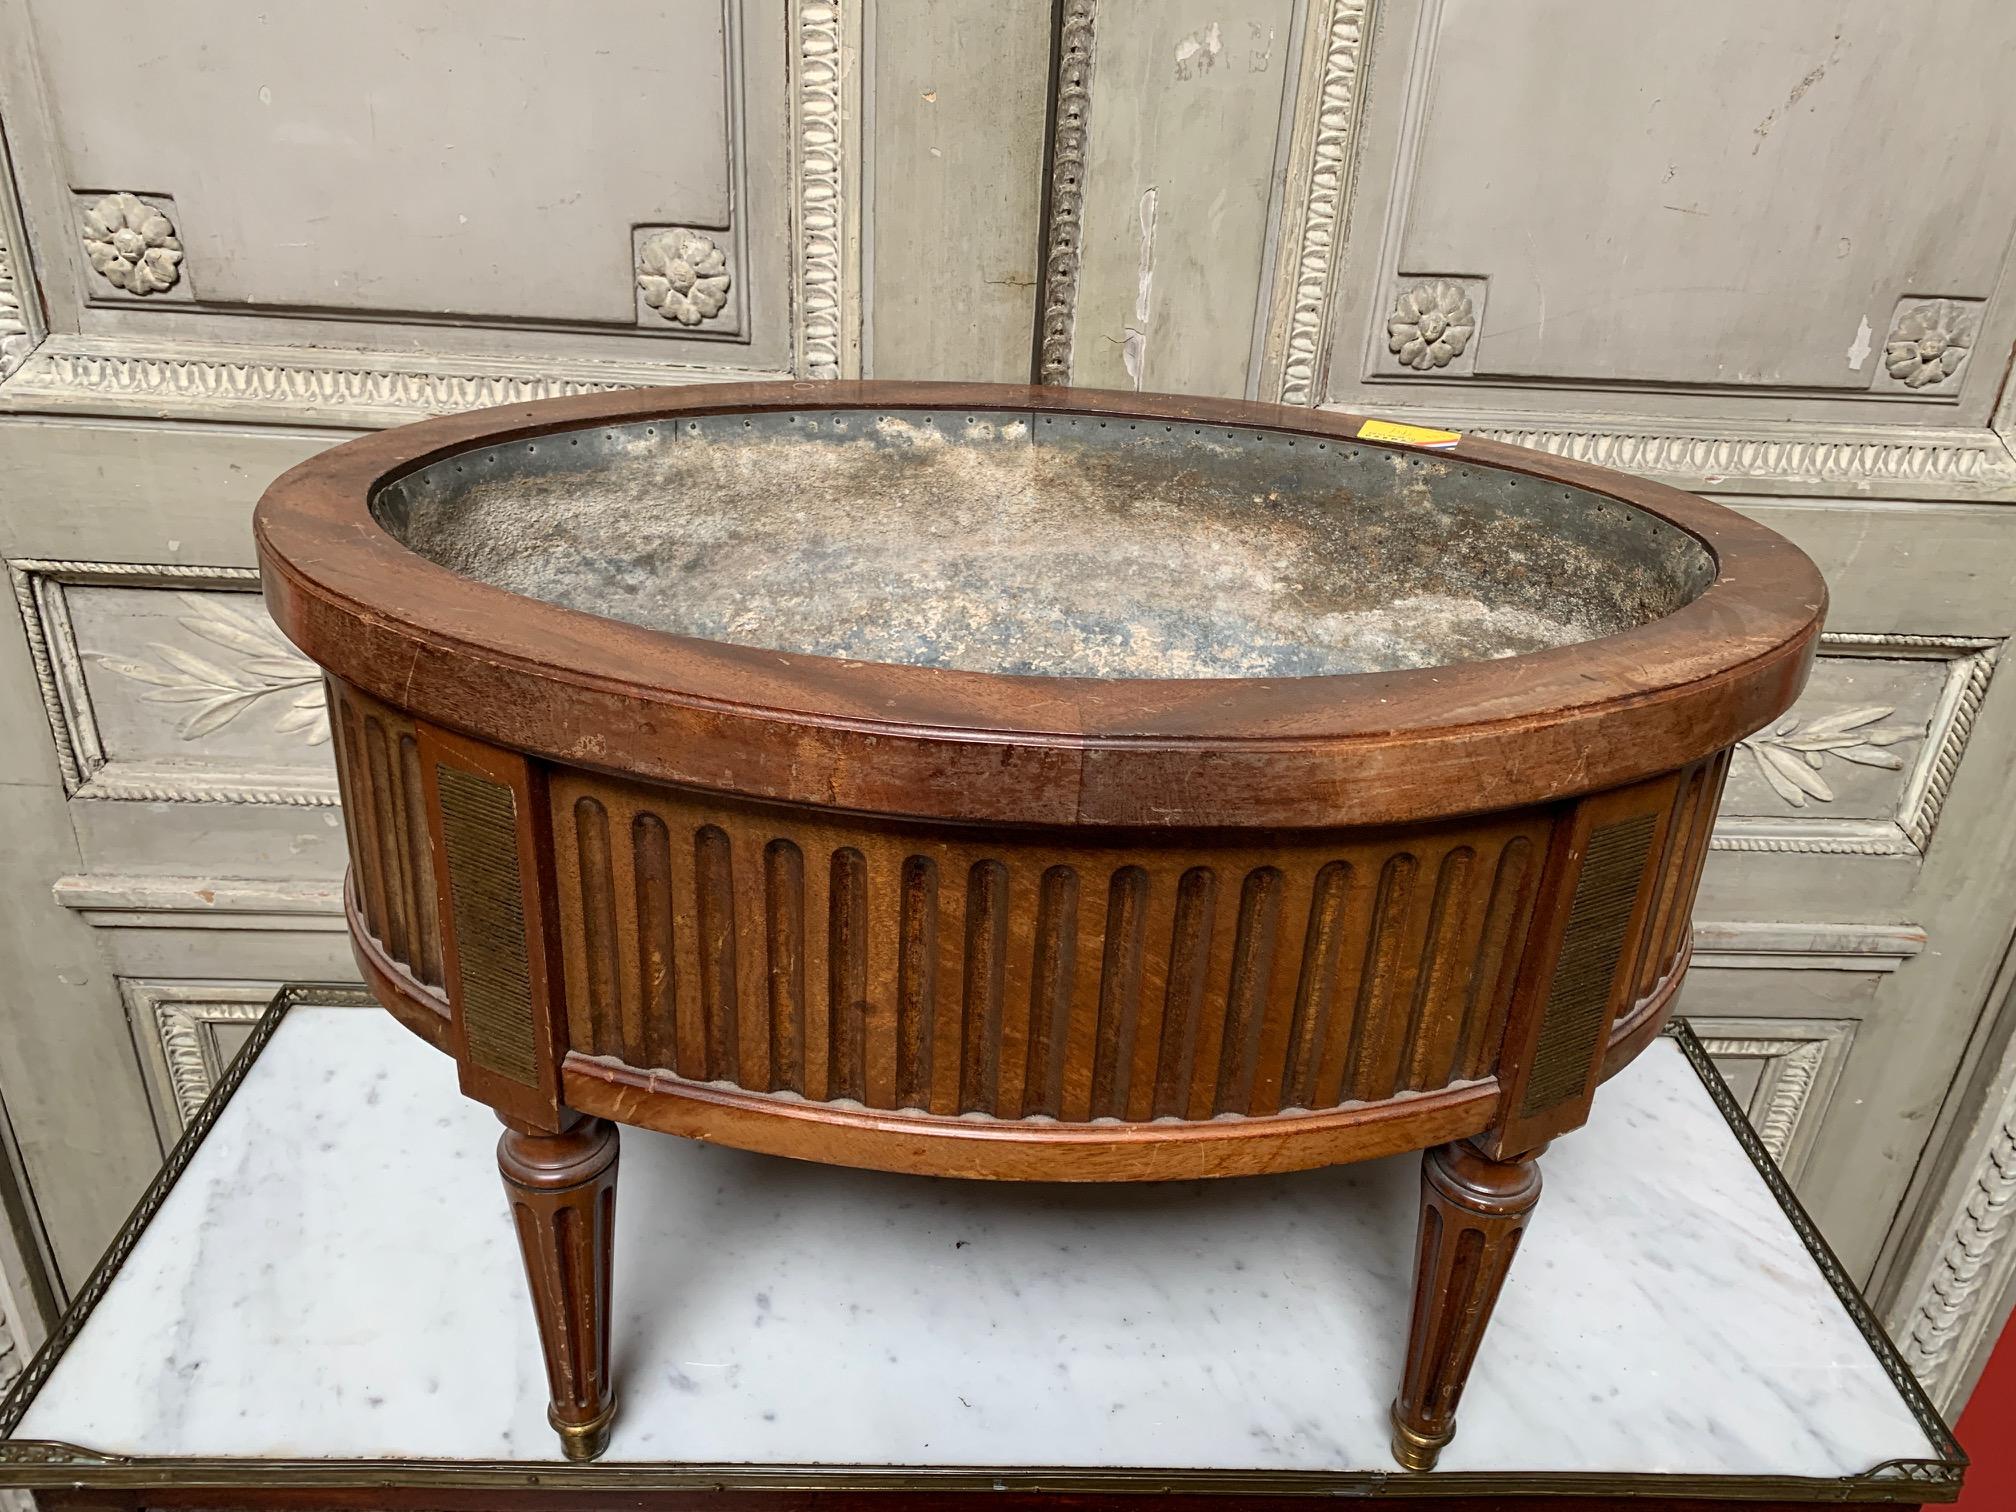 A French 19th Century Mahogany and Brass Louis XVI Style Oval Jardinière with tin-line interior. The wood jardiniere or planter is accented with fluted motif and elegant patinated brass details. 